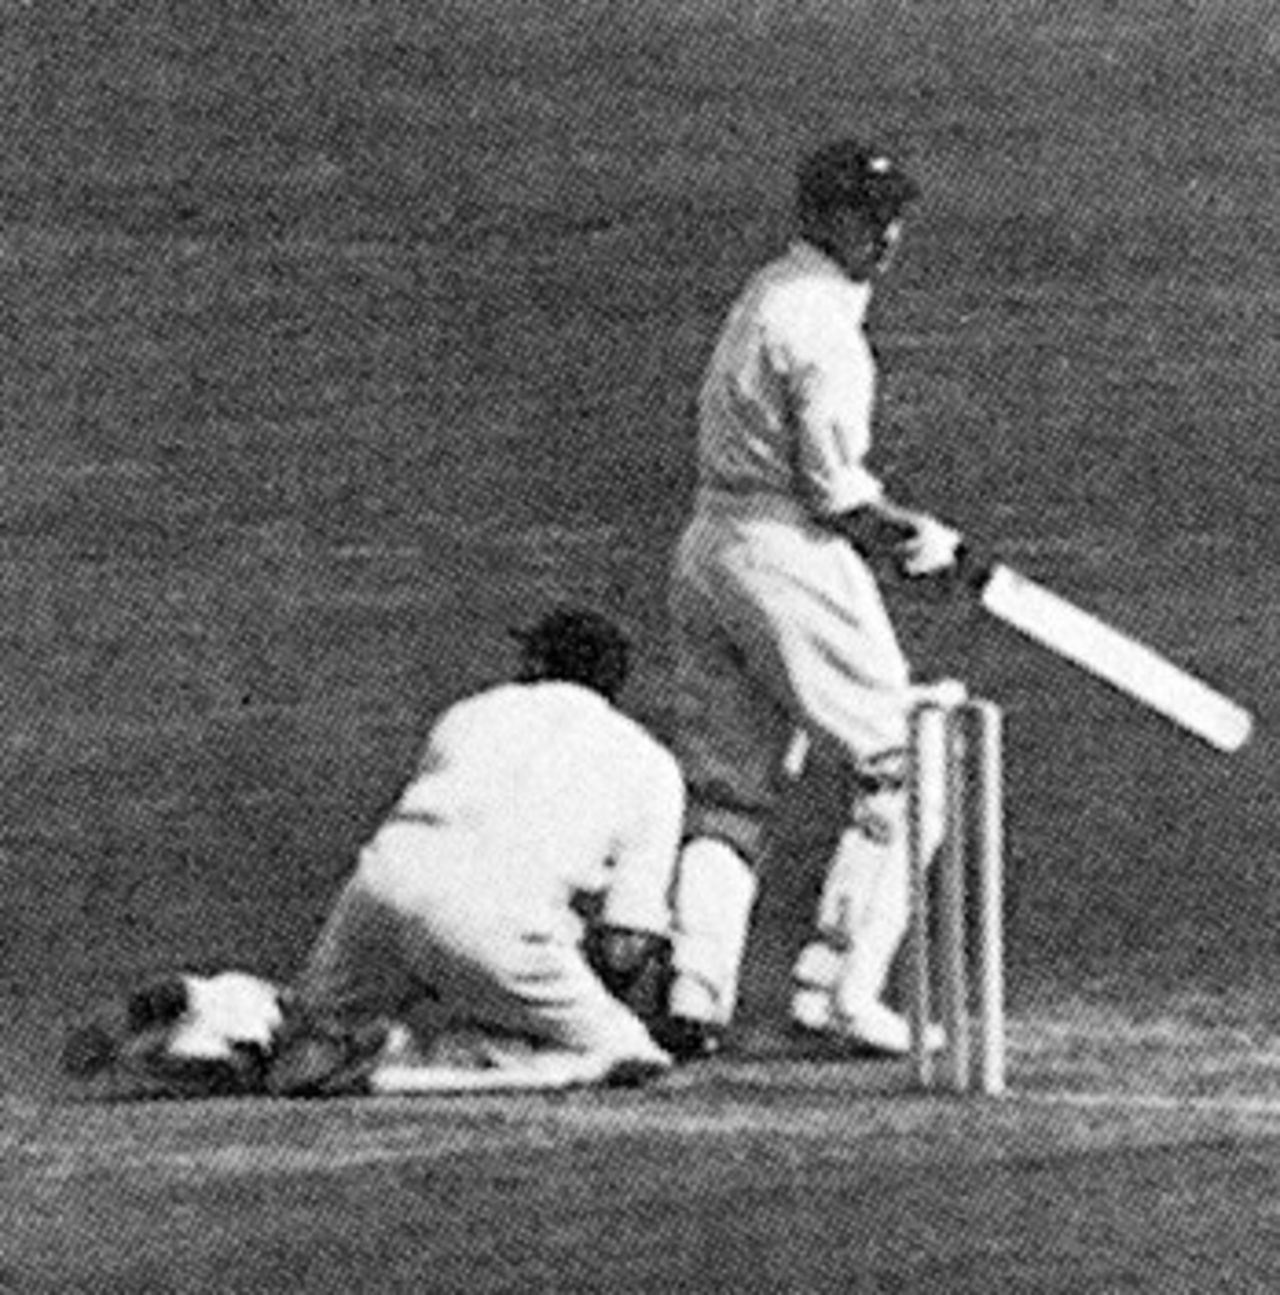 Len Hutton becomes the first man to be given out obstructed the field in a Test as Russell Endean scrambles for the ball, England v South Africa, 5th Test, The Oval, August 1951